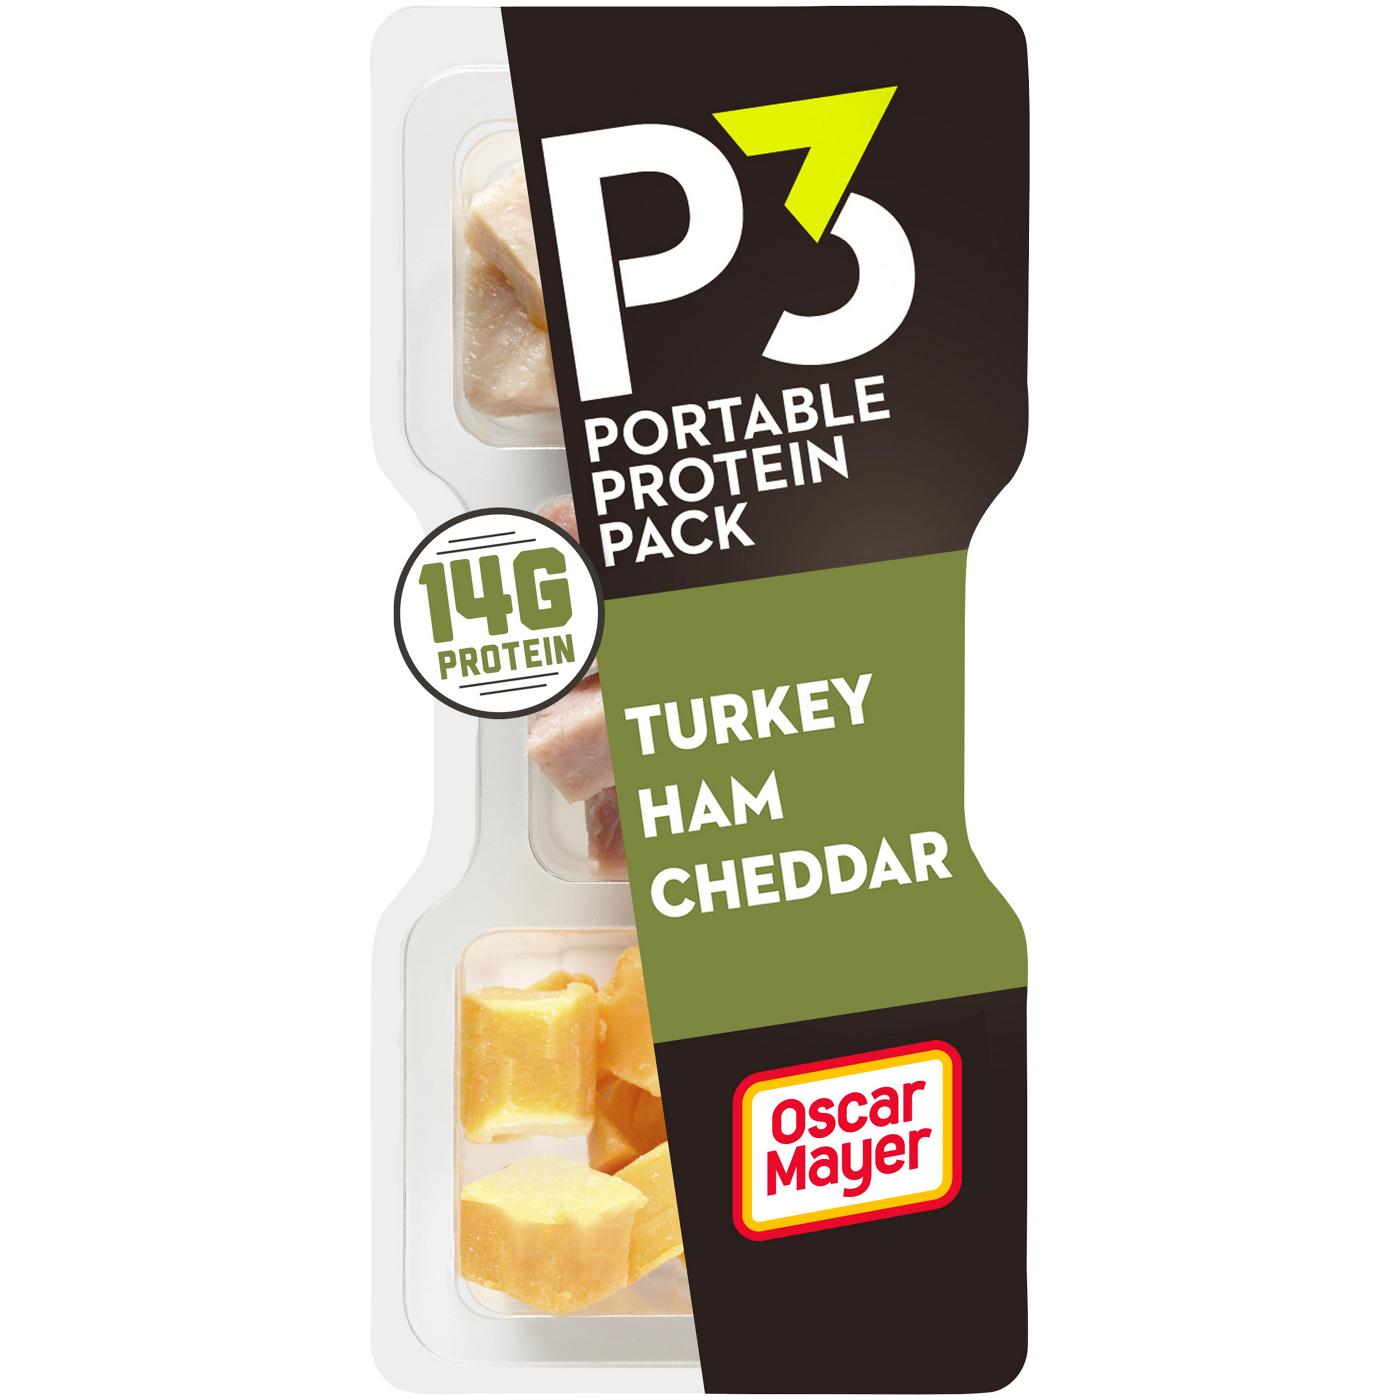 P3 Portable Protein Pack Snack Tray - Turkey, Ham & Cheddar; image 1 of 3